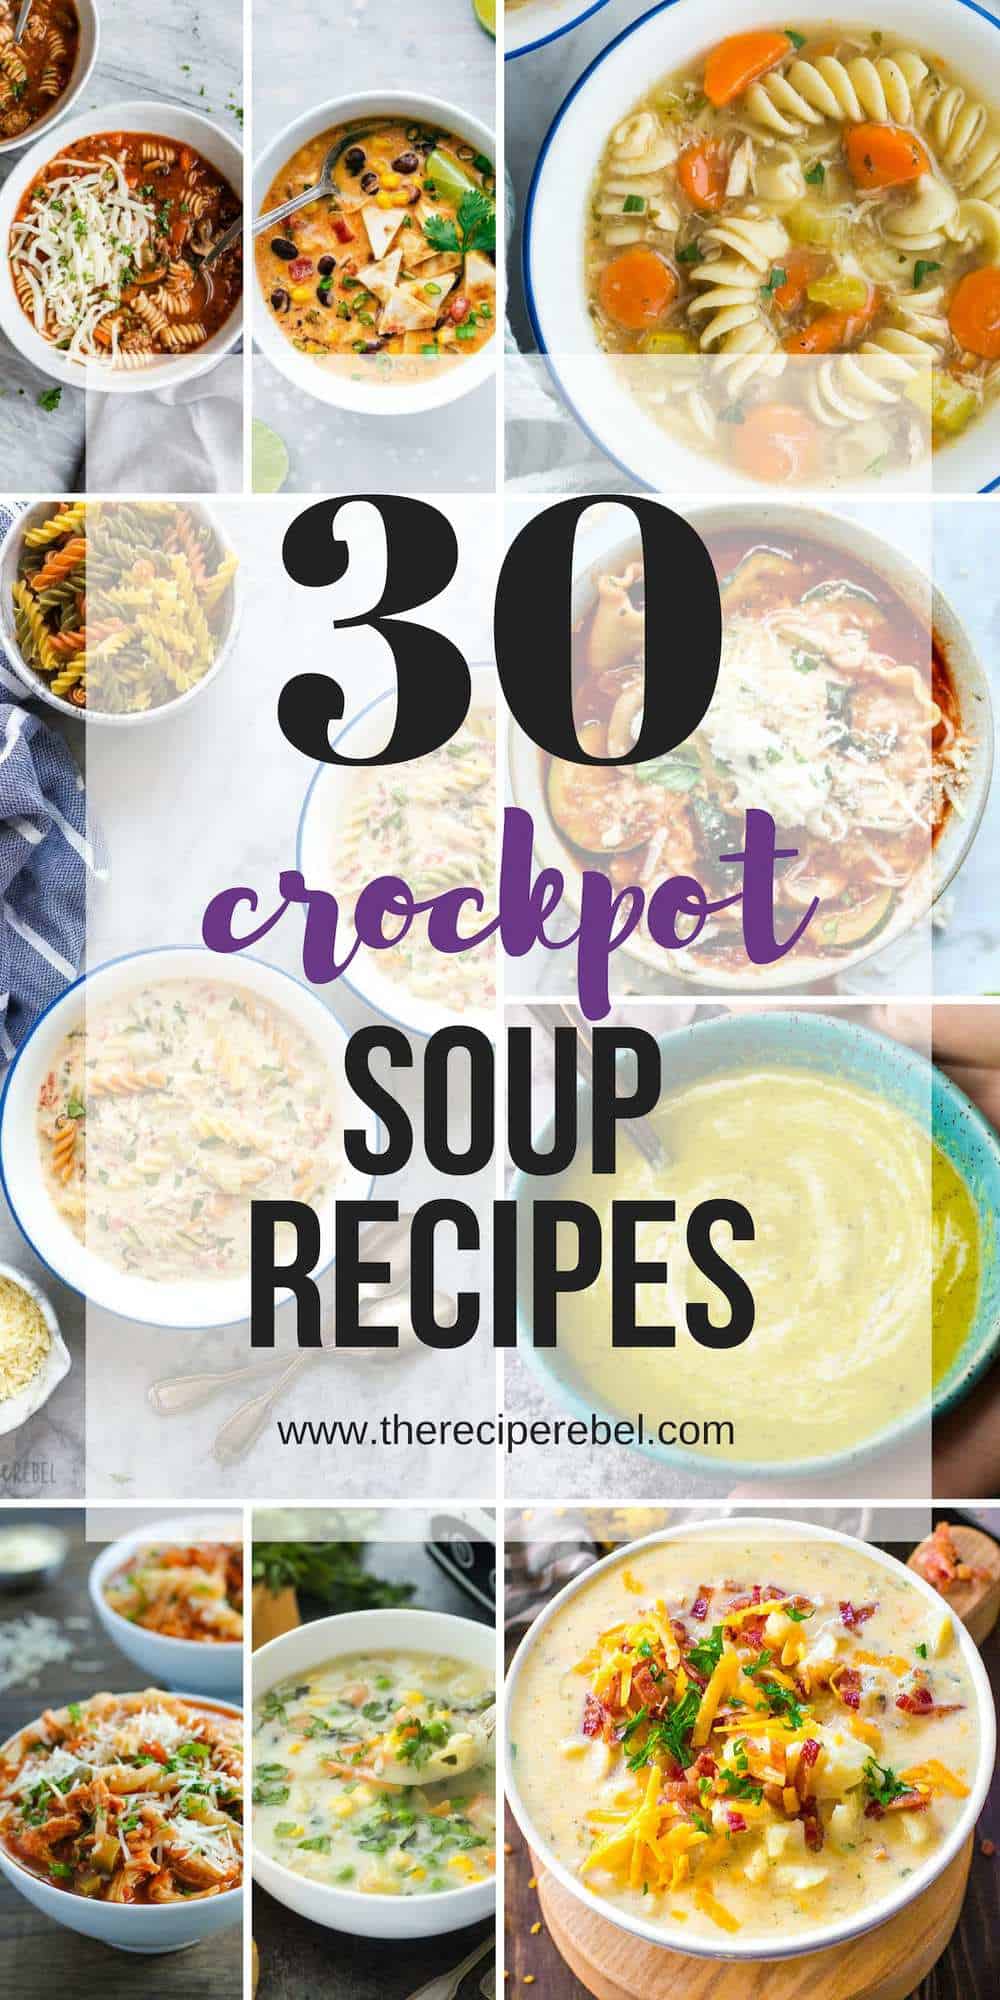 30 Crockpot Soup Recipes - easy and delicious! | The Recipe Rebel